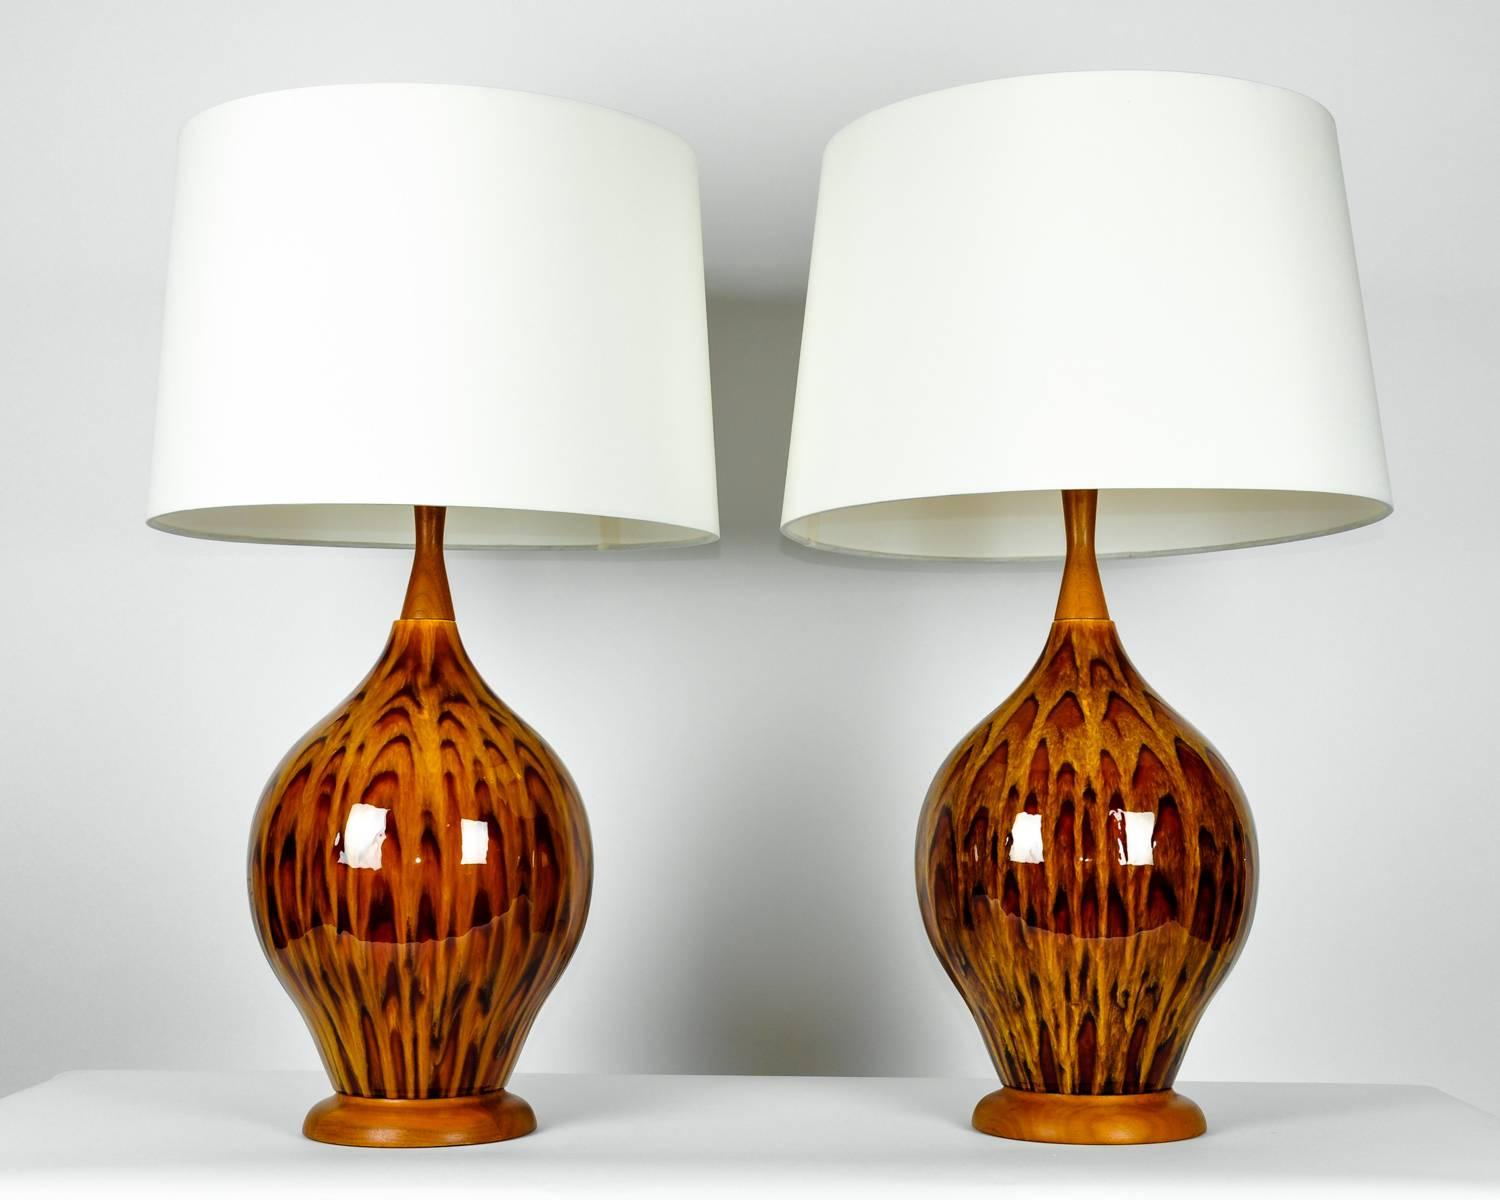 Vintage Italian glazed porcelain pair table lamps. Each lamp is in excellent working condition. Each lamp measure 31 inches high x 11 inches diameter. Rewired for US use, each lamp comes with a round drum silk exterior shade measure 12